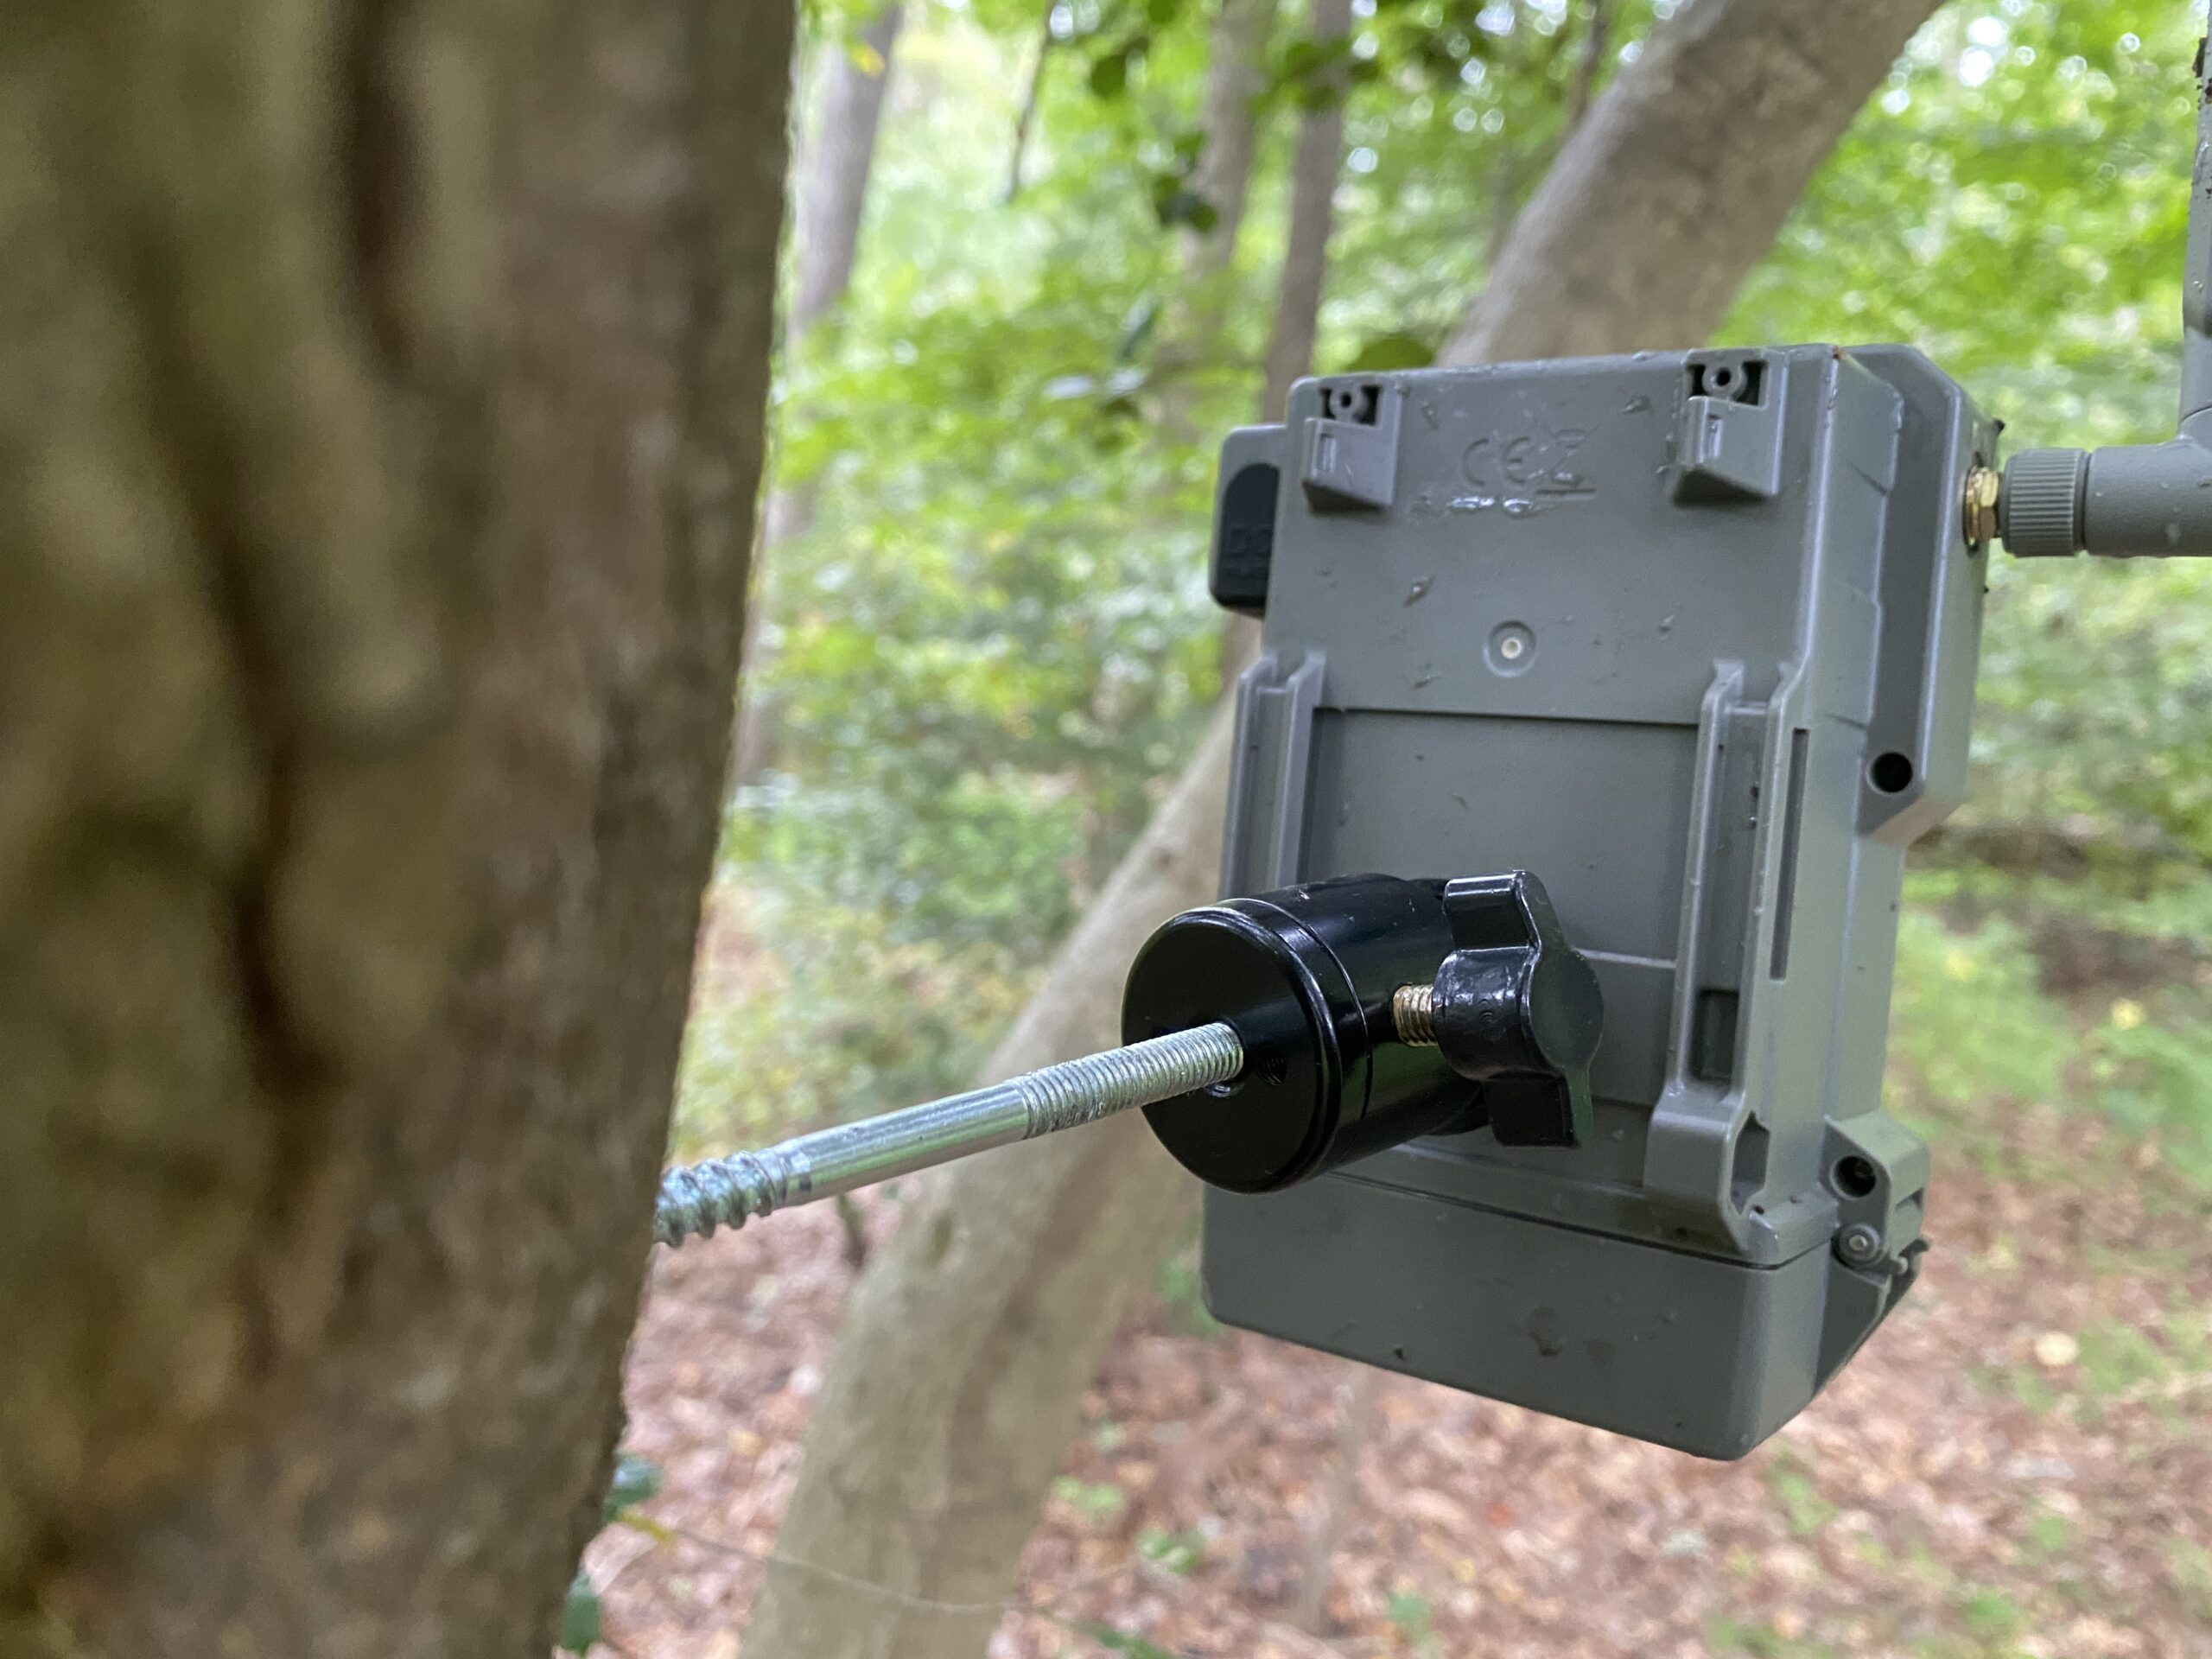 The SpyPoint Flex mounted to a tree